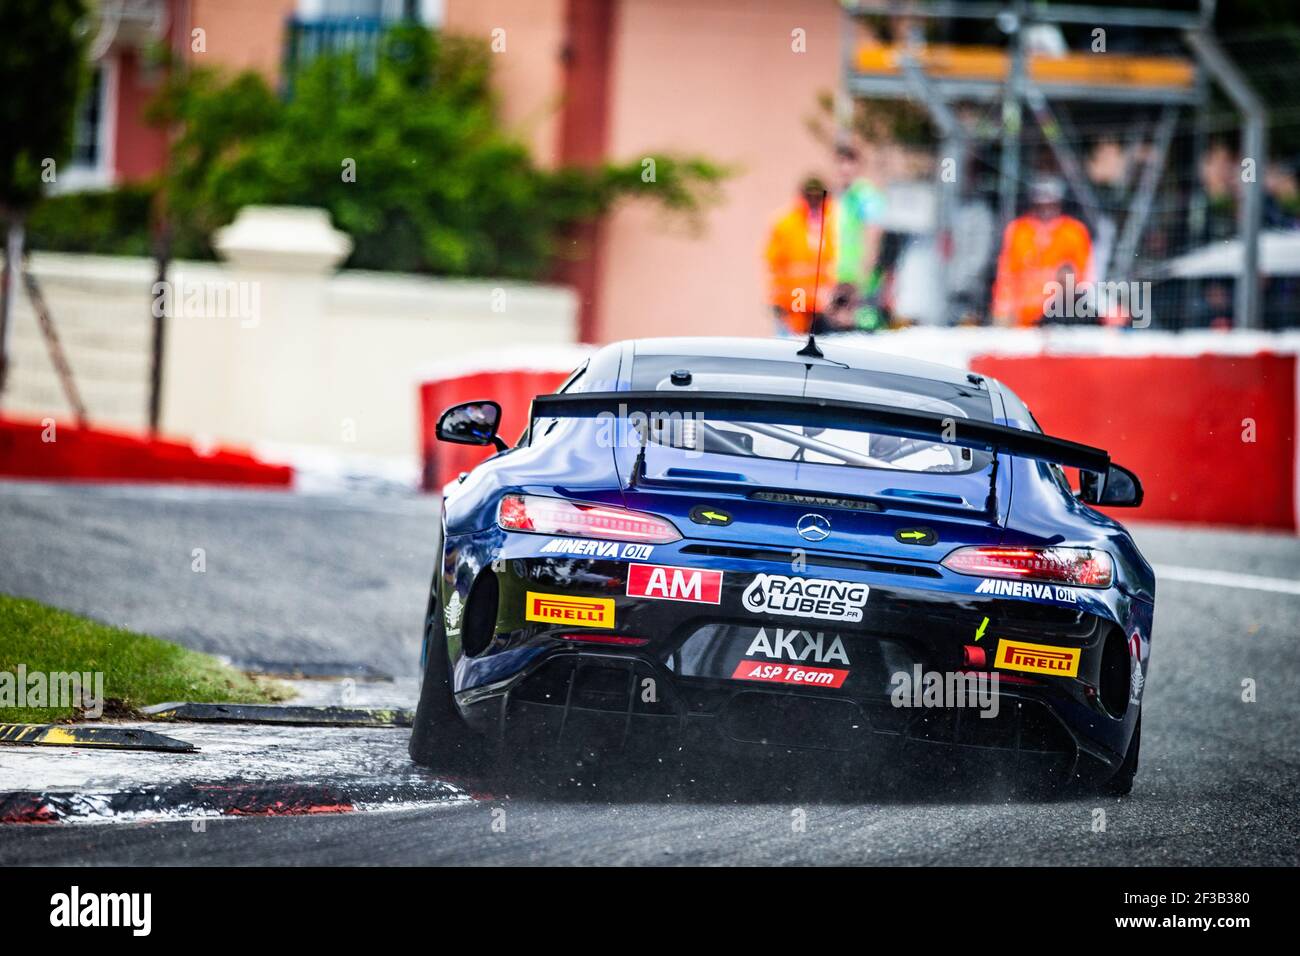 53 BOURRET Christophe (fra), GIBON Pascal (fra), Mercedes AMG team Akka-ASP, action during the 2019 Grand Prix de Pau, France from May 17 to 19 at Pau city - Photo Antonin Vincent / DPPI Stock Photo